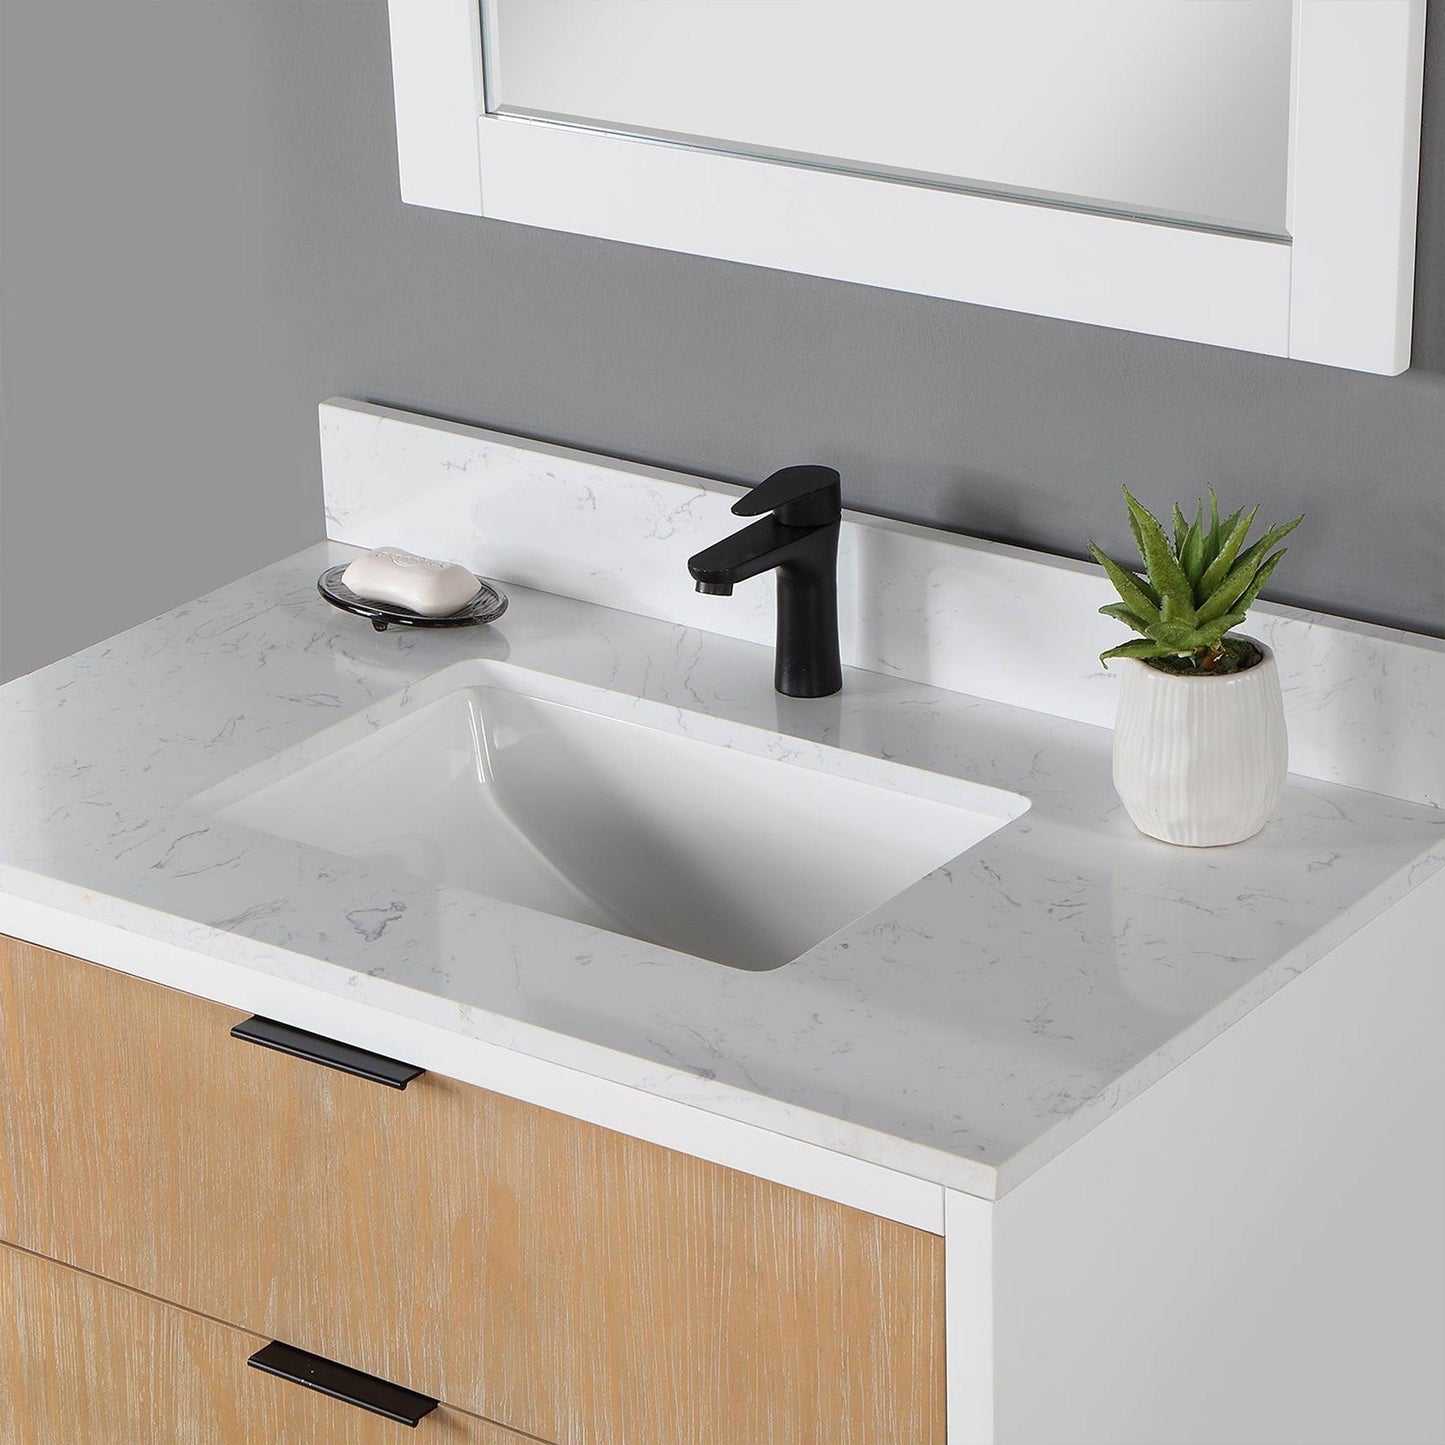 Altair Dione 36" Single Weathered Pine Wall-Mounted Bathroom Vanity Set With Mirror, Aosta White Composite Stone Top, Single Rectangular Undermount Ceramic Sink, Overflow, and Backsplash